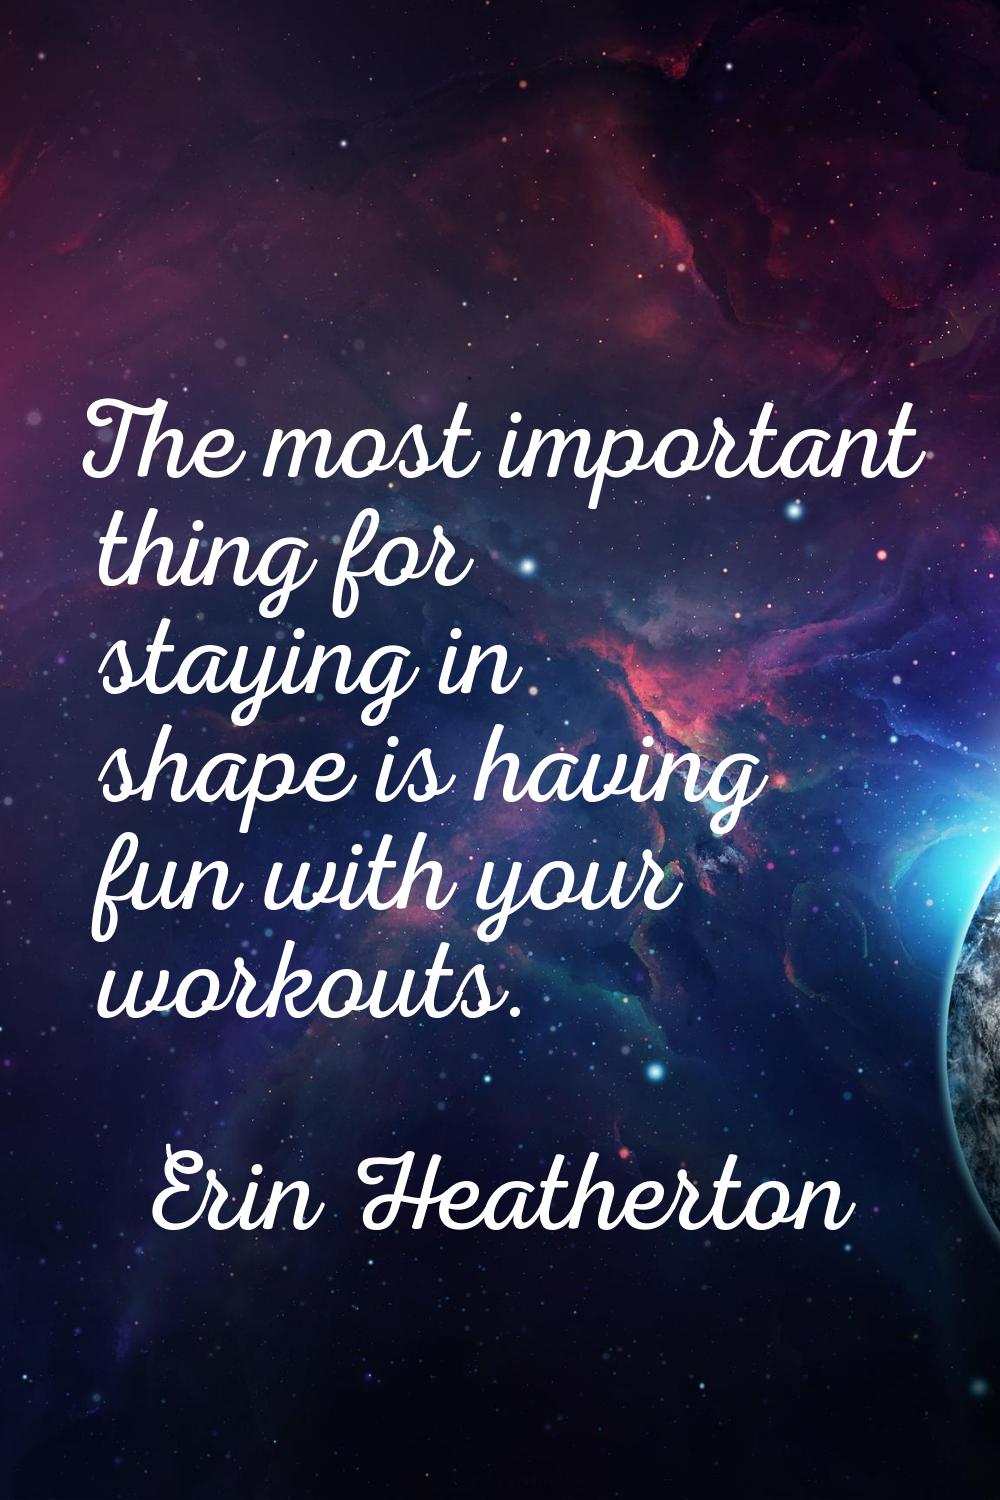 The most important thing for staying in shape is having fun with your workouts.